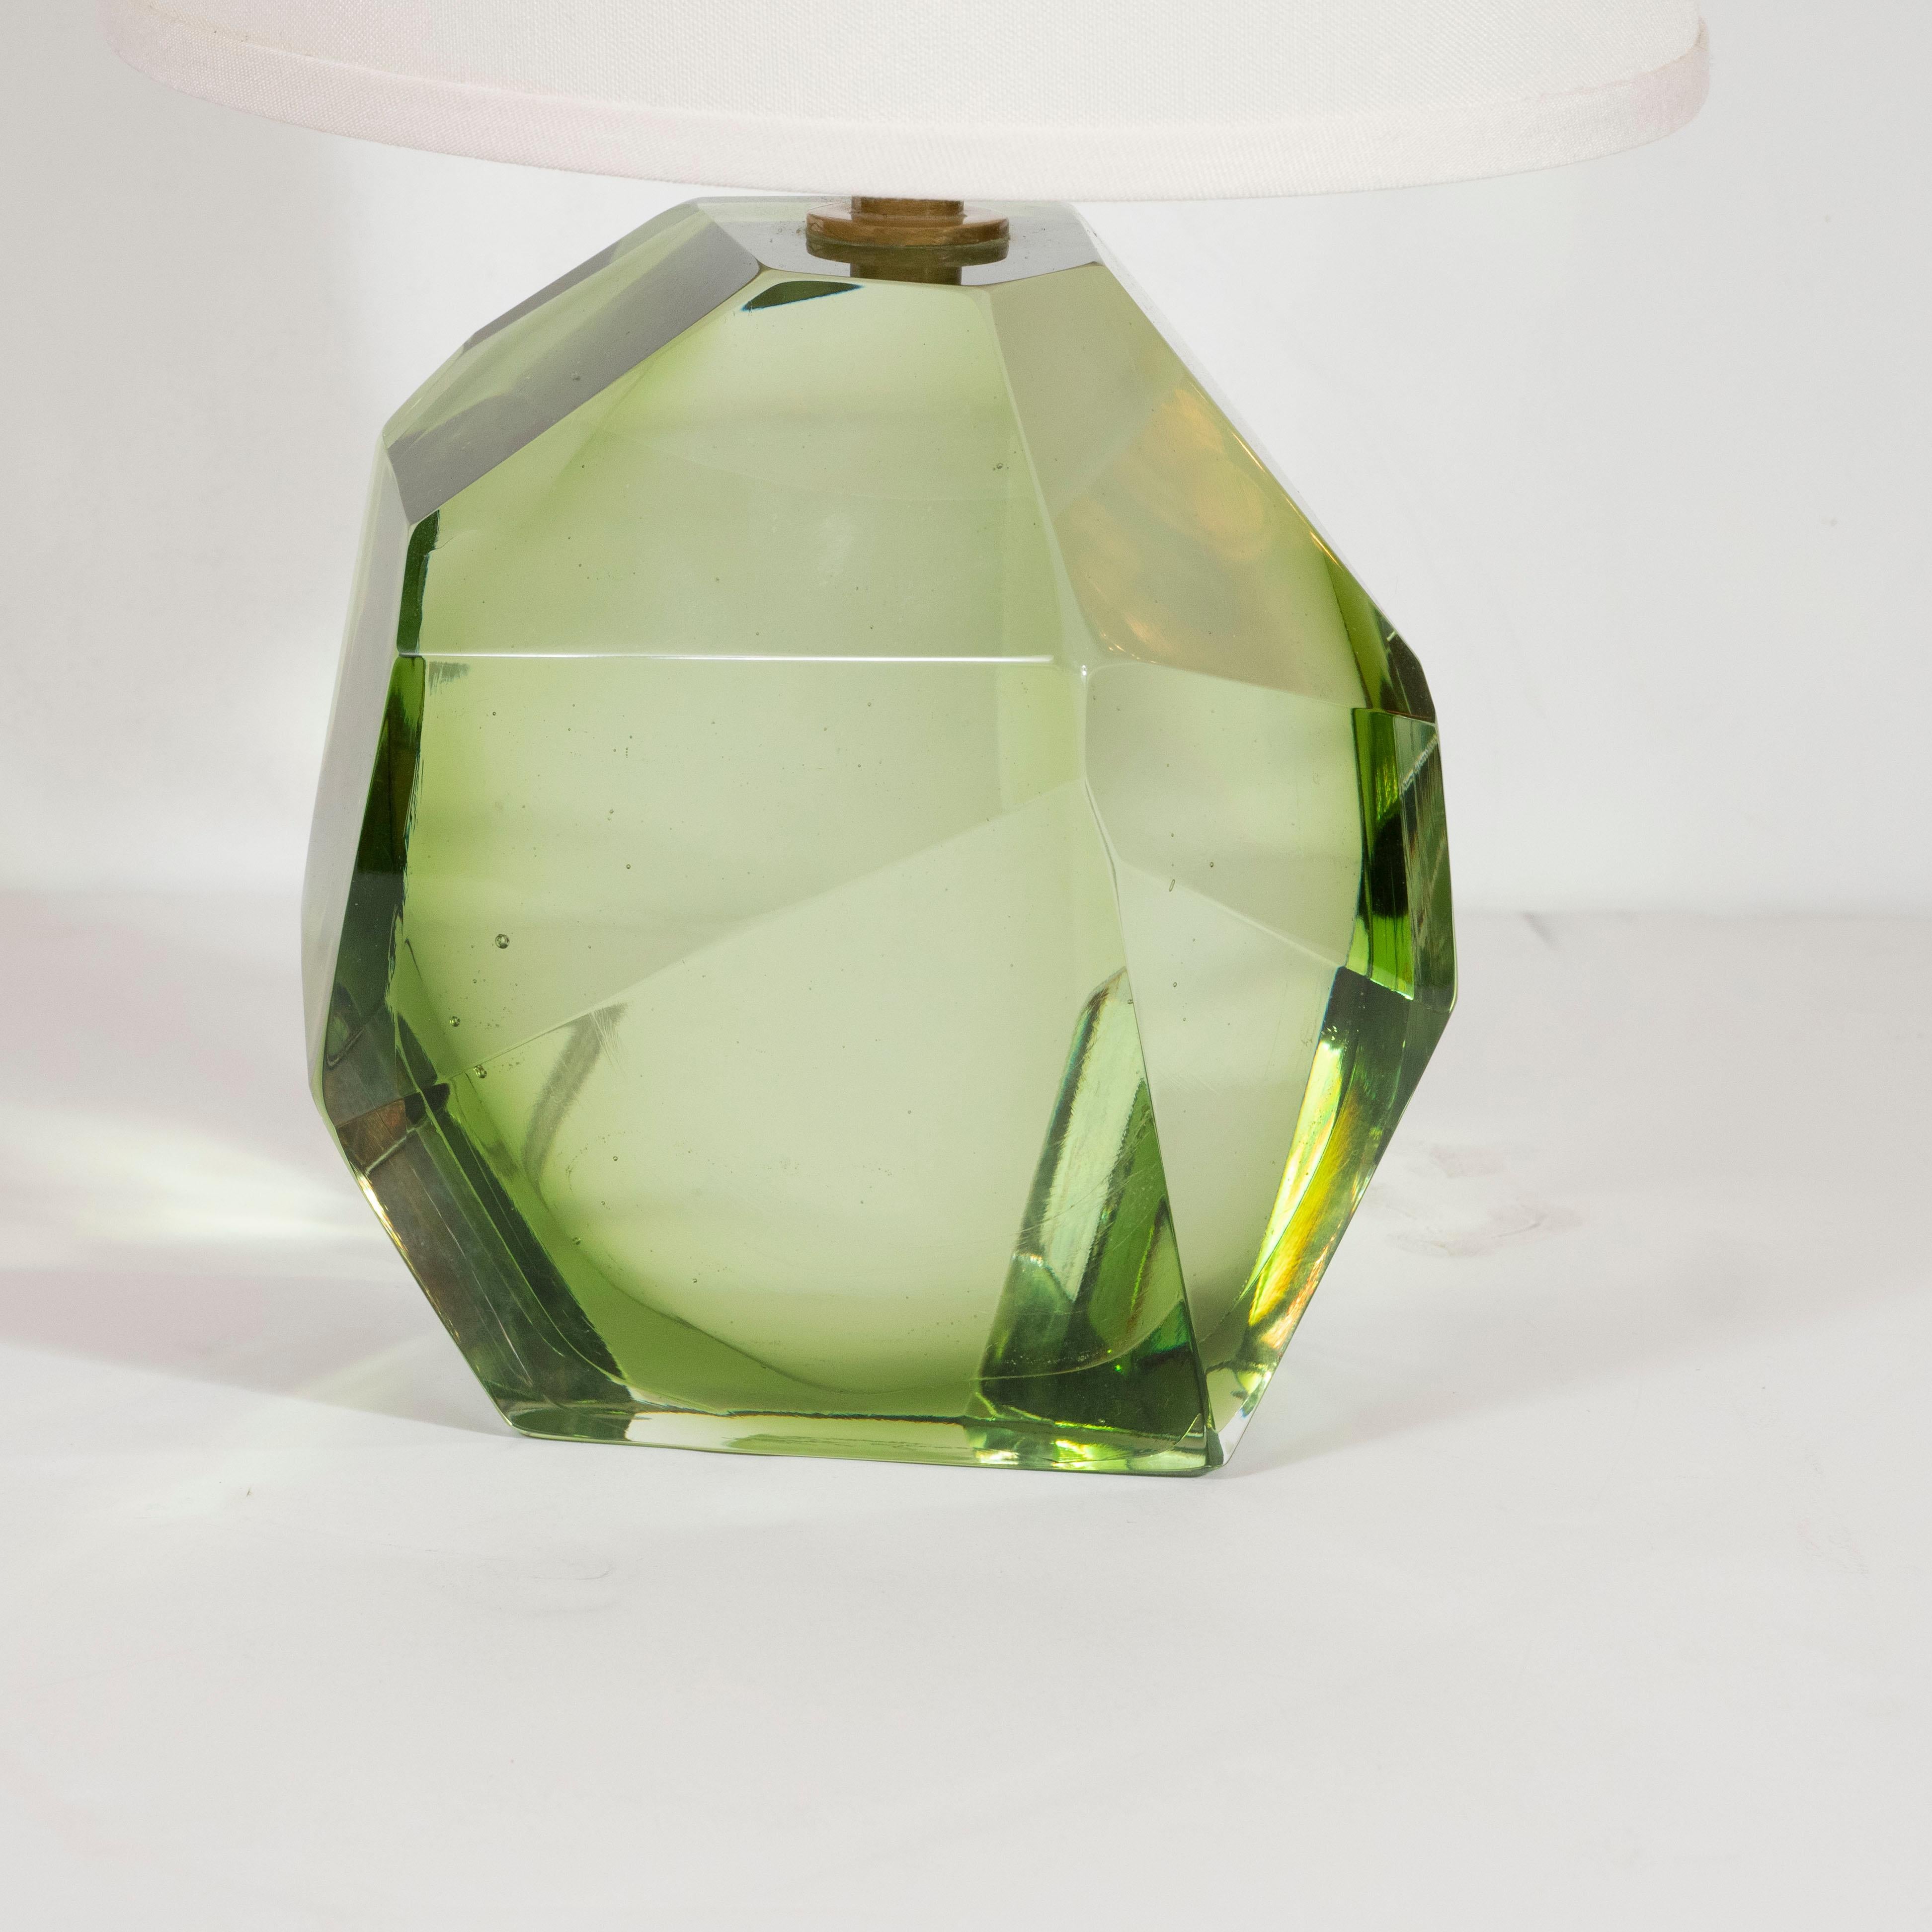 This stunning and elegant table lamp was realized in Murano, Italy- the island off the coast of Venice renowned for centuries for its superlative glass production. It features a faceted Murano glass body- resembling an oversized cut gemstone- in a